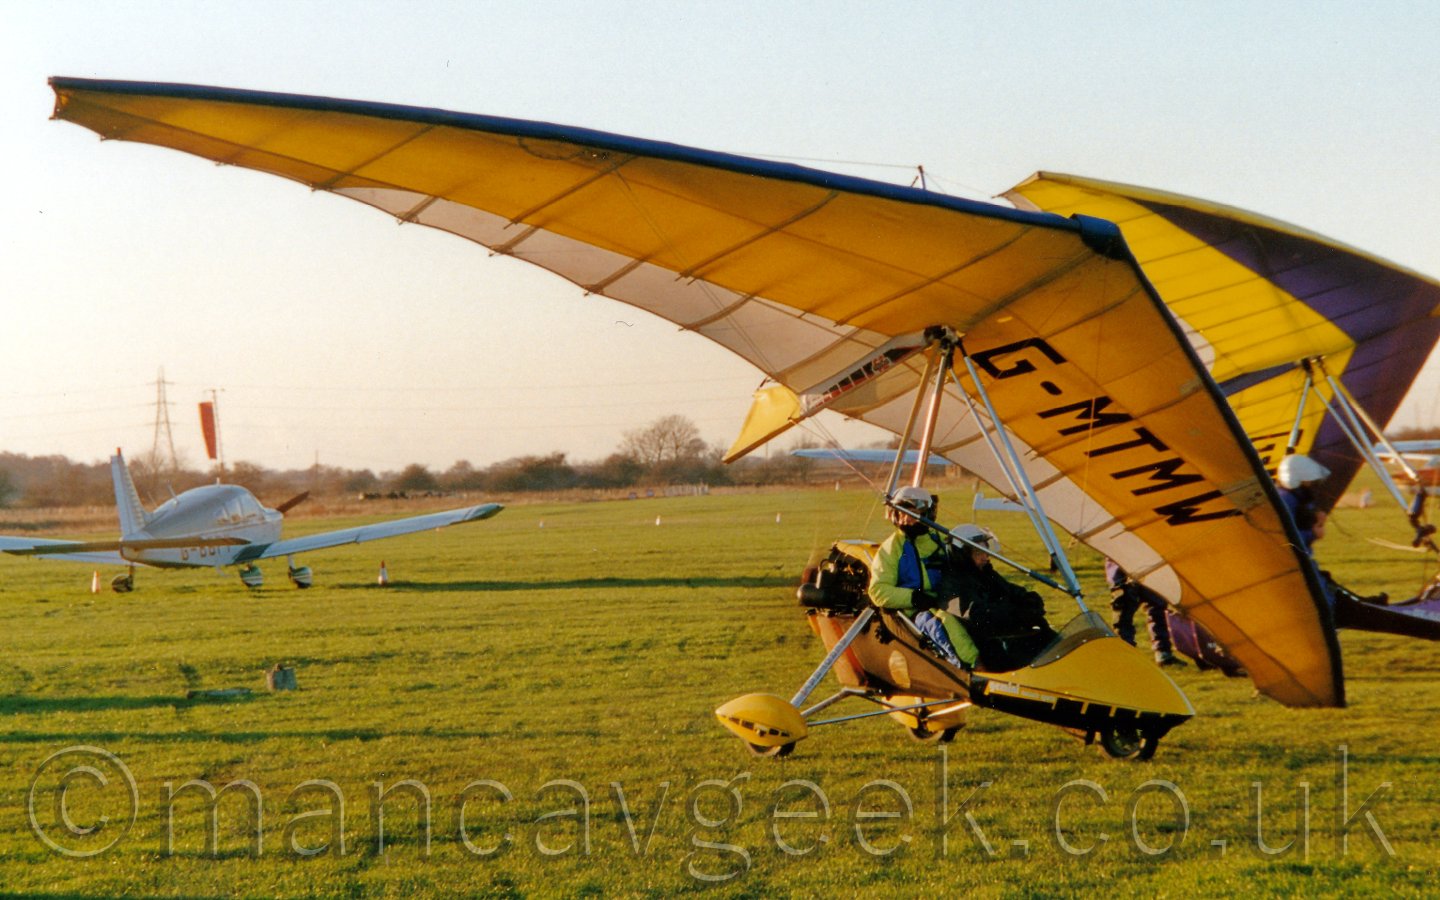 Side view of a yellow microlight, basically a shaped bucket on wheels suspended beneath a large, triangular, fabric-covered wing, with 2 people sitting in tandem in the bicket, and a small engine and propellor mounted on the rear, facing to the righton a grass airfield, under a bright but hazy sky.